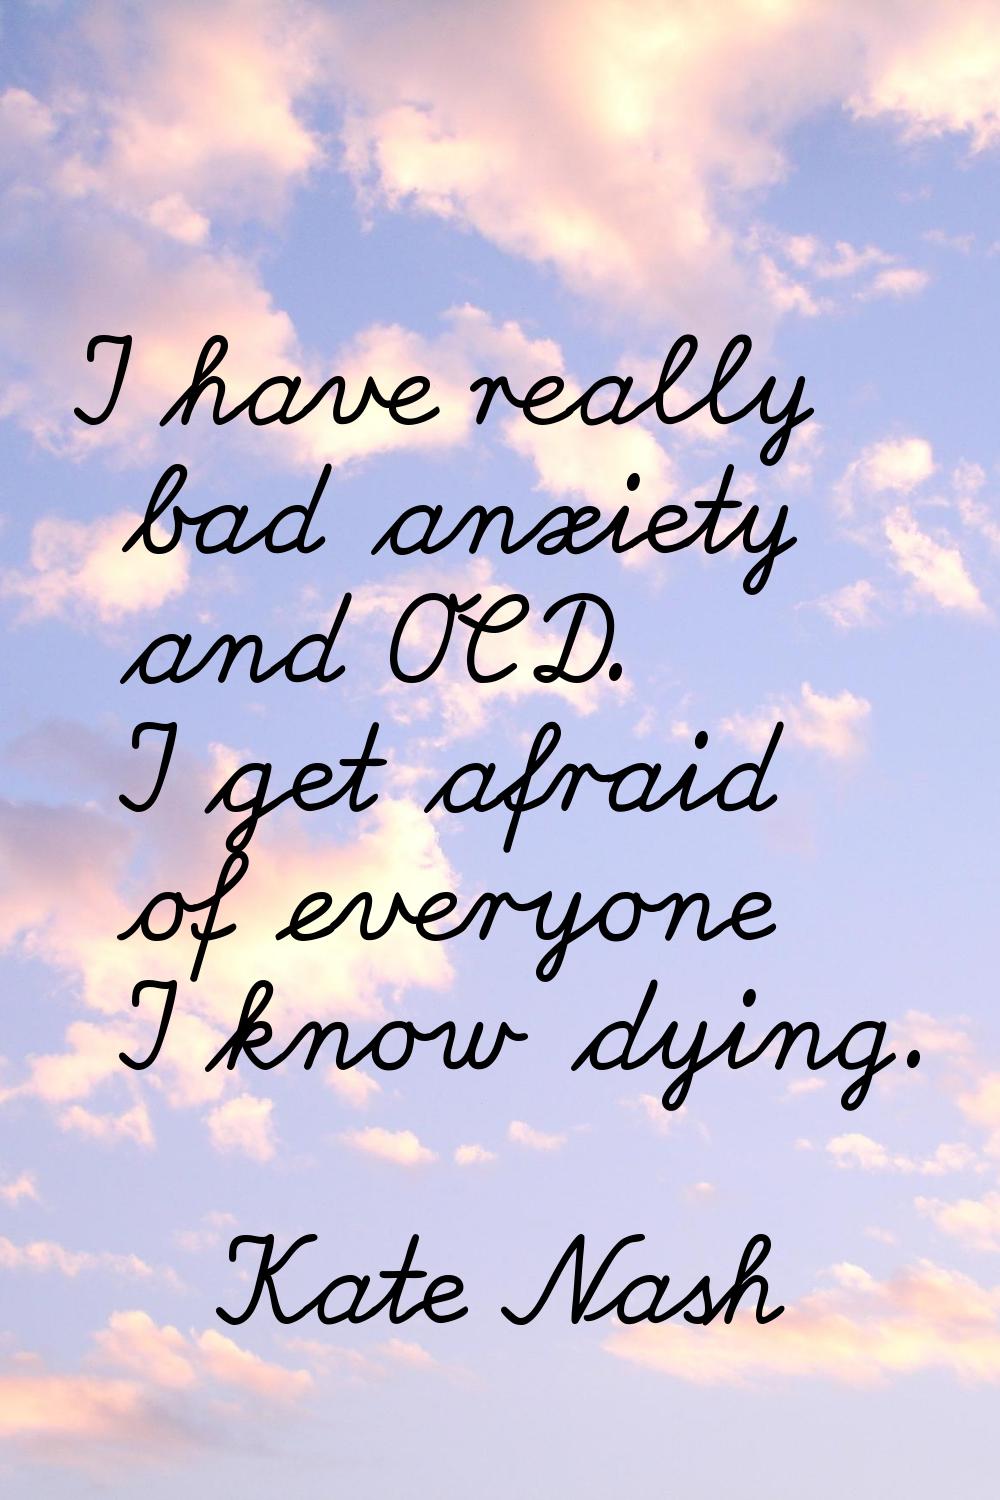 I have really bad anxiety and OCD. I get afraid of everyone I know dying.